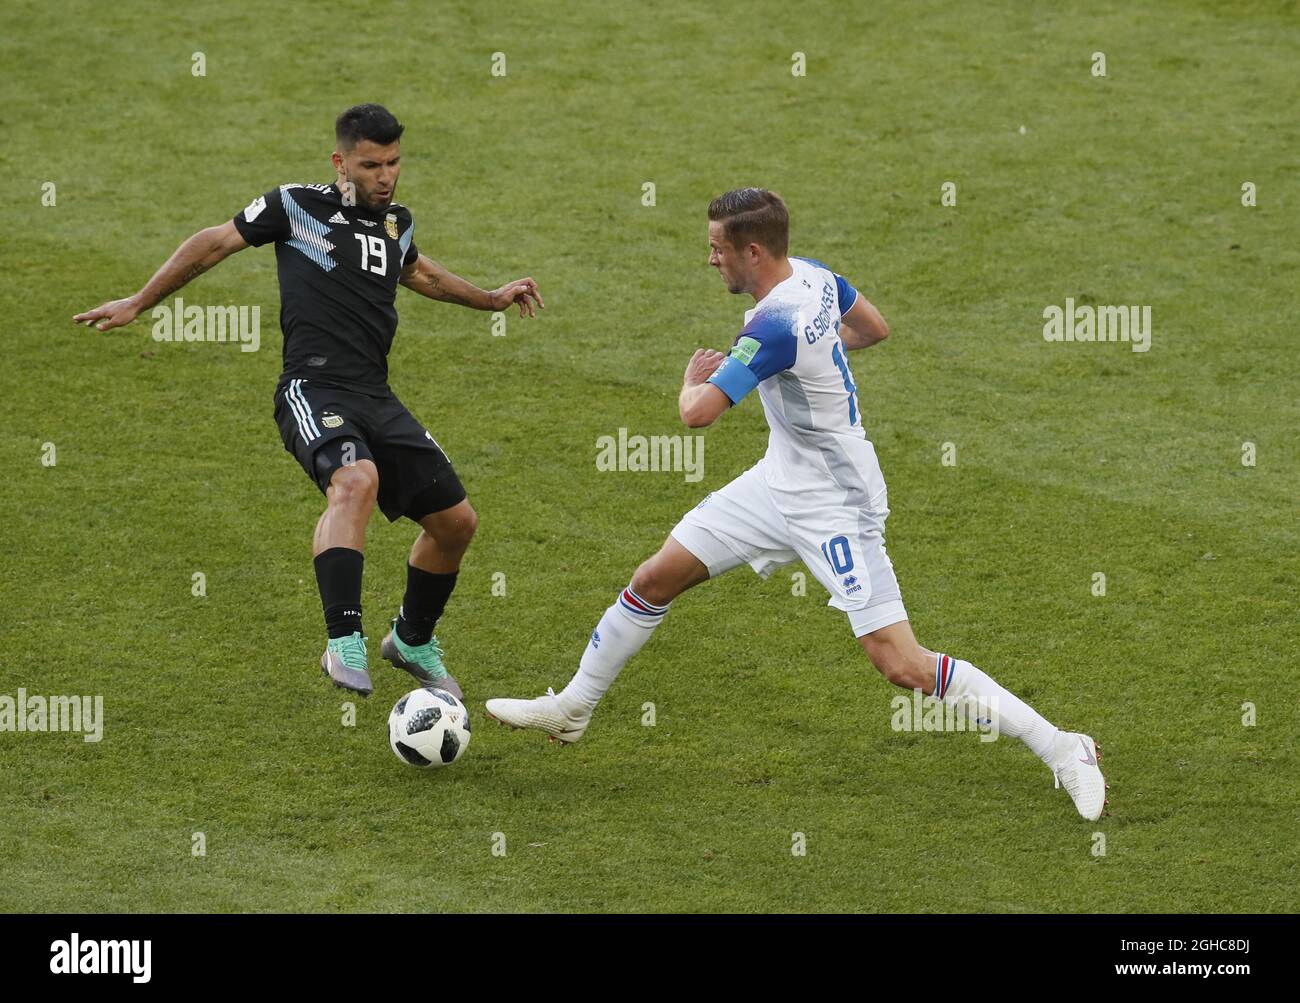 Sergio Aguero of Argentina and Gylfi Sigurdsson of Iceland during the FIFA World Cup 2018 Group D match at the Spartak Stadium, Moscow. Picture date 15th June 2018. Picture credit should read: David Klein/Sportimage via PA Images Stock Photo